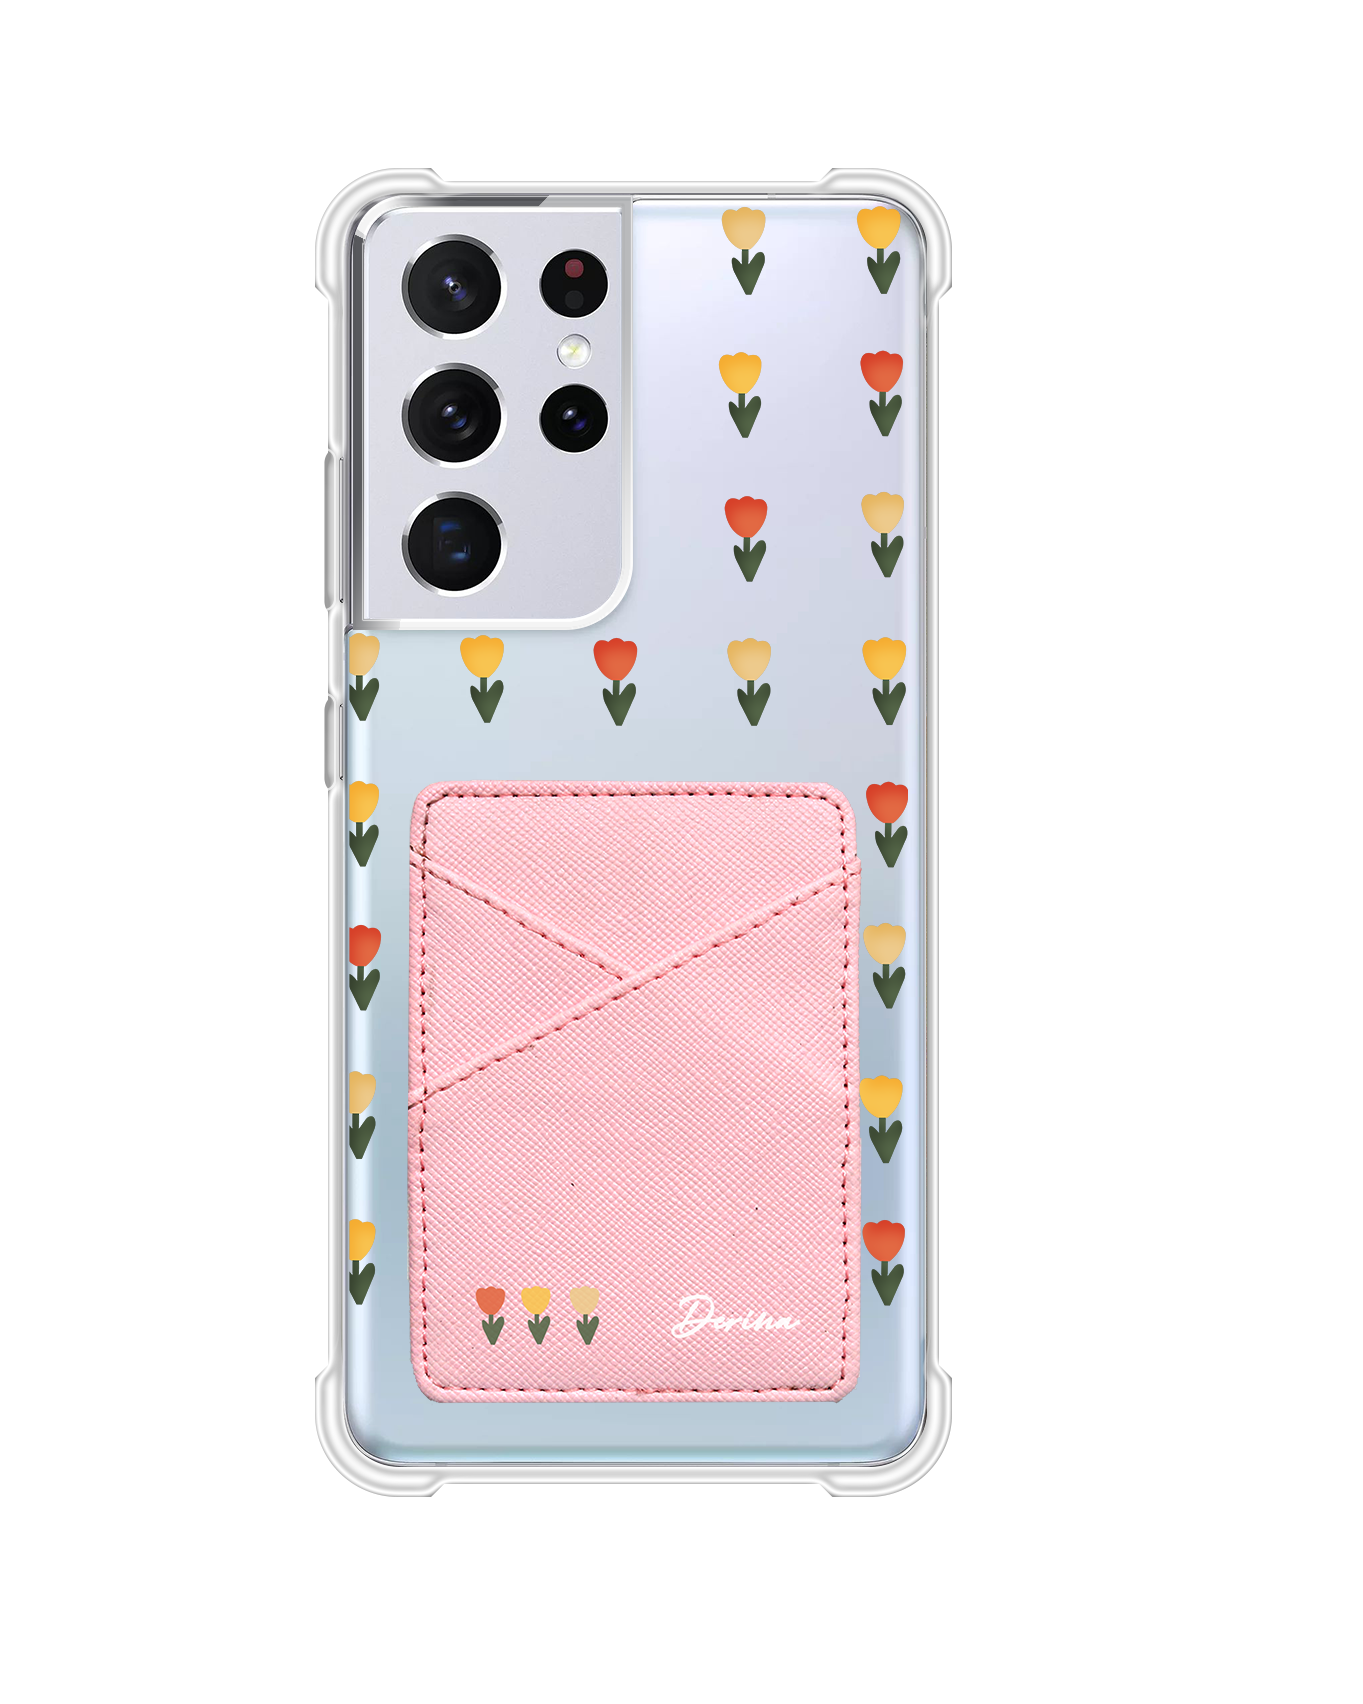 Android Phone Wallet Case - Tulip Fever 2.0